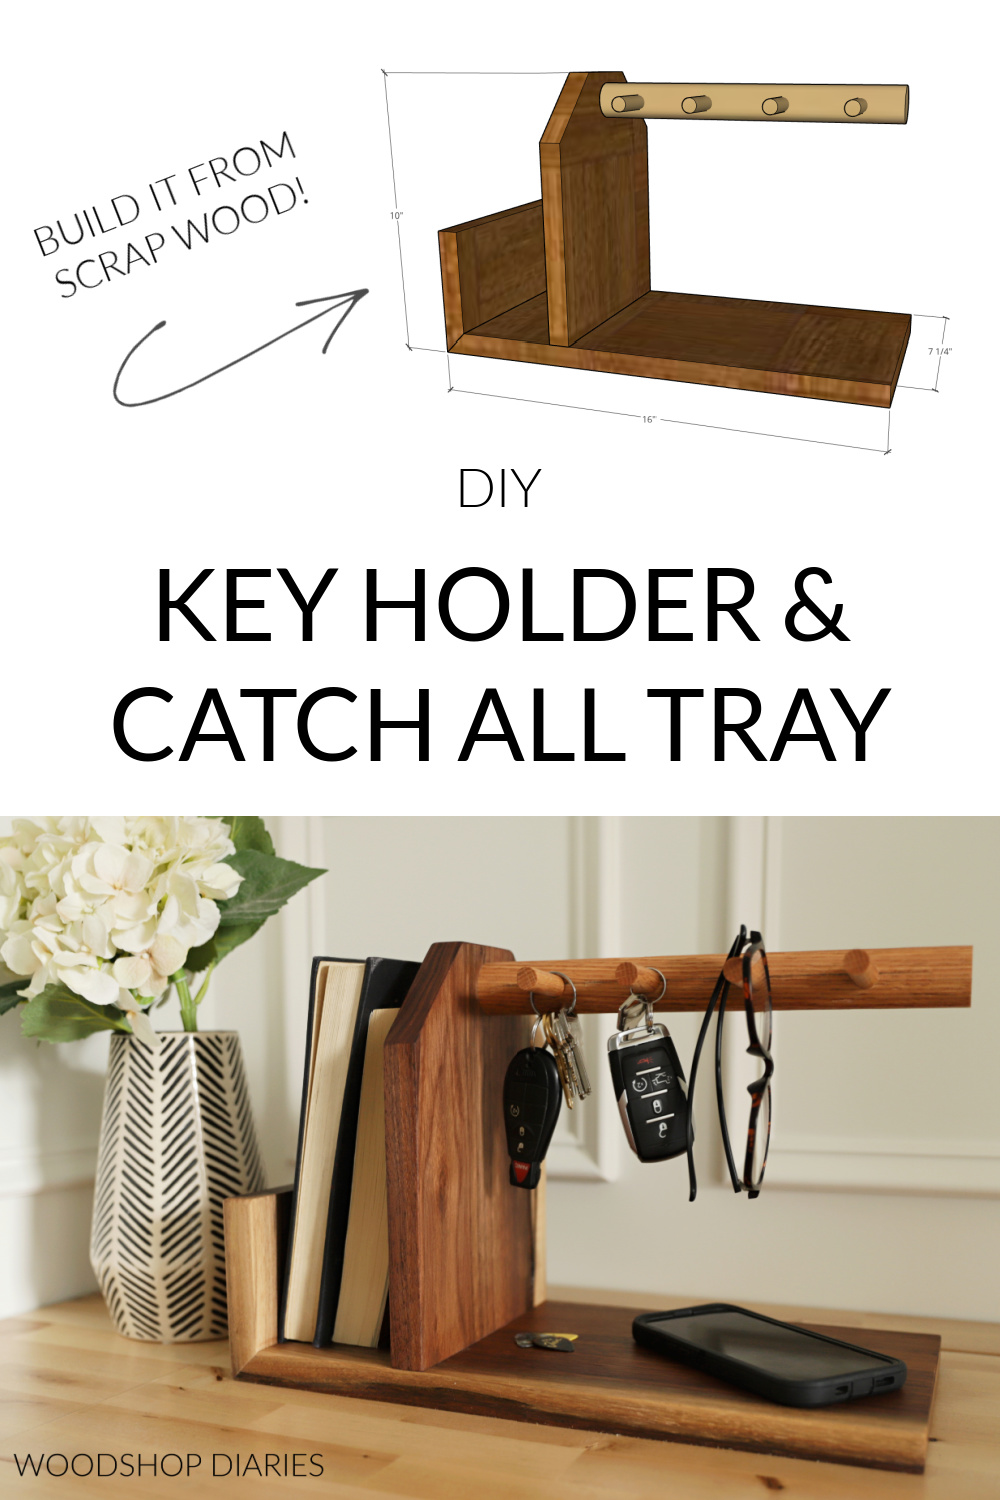 Pinterest collage showing key holder and catch all tray at bottom with dimensional diagram at top with text "build it from scrap wood!" and "DIY key holder & catch all tray"